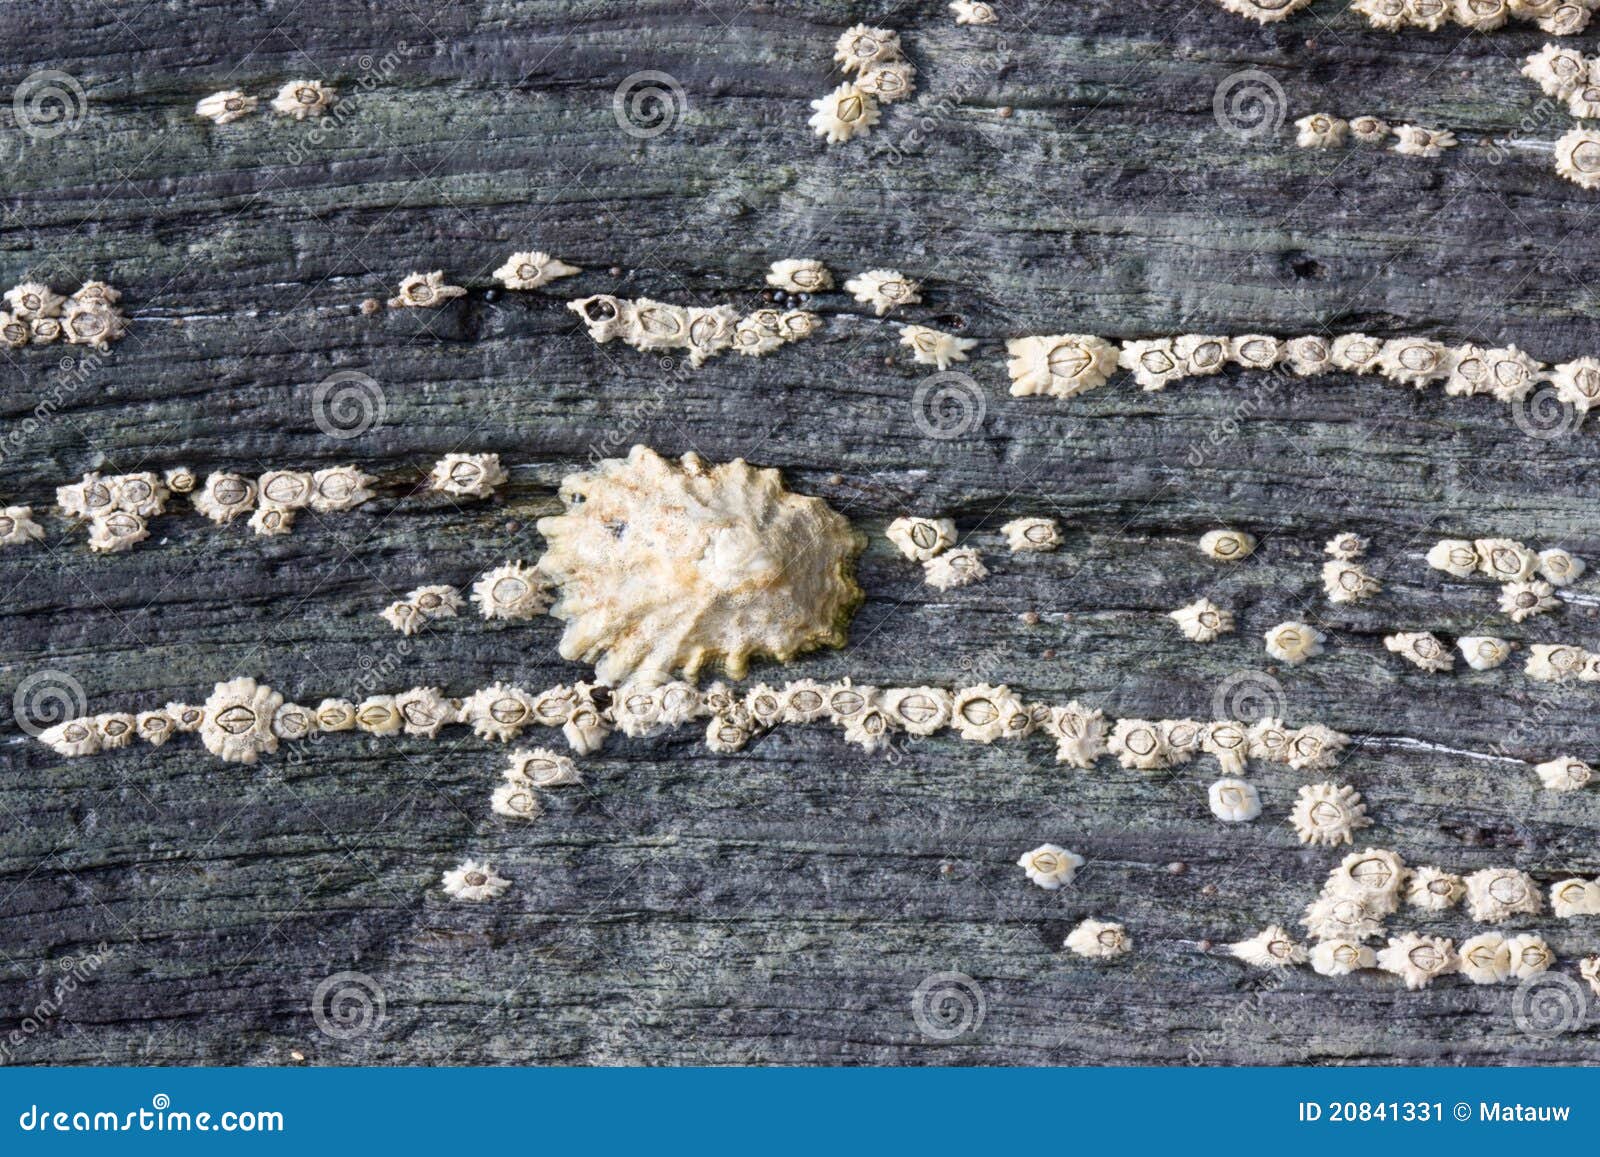 limpet and barnacles